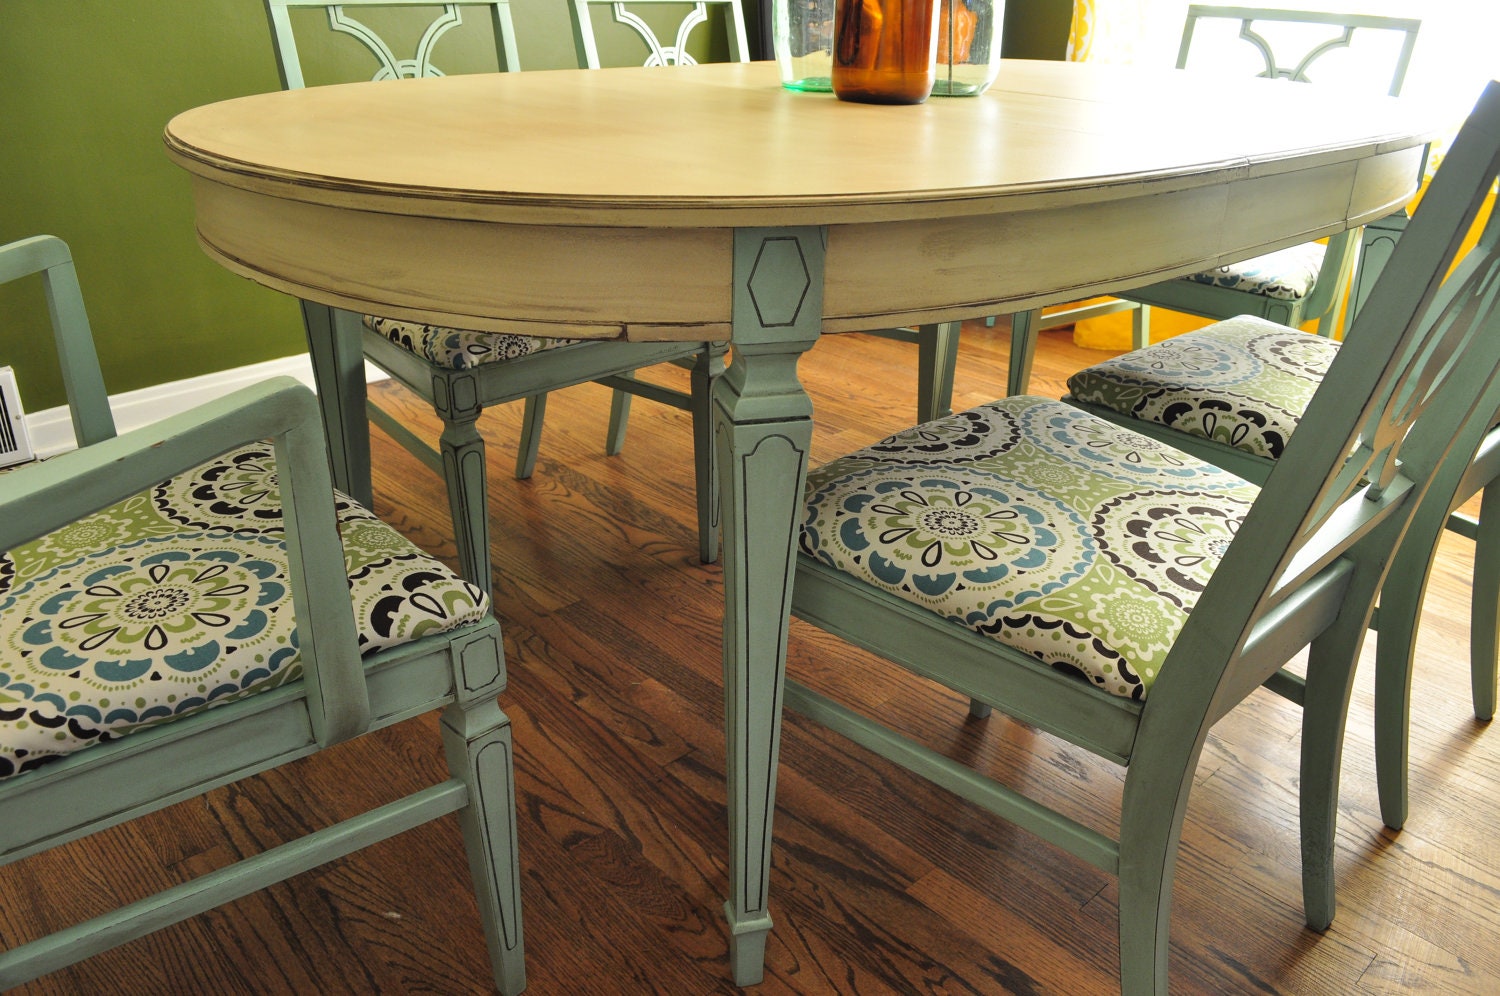 Painted Dining Room Table With An Inlay